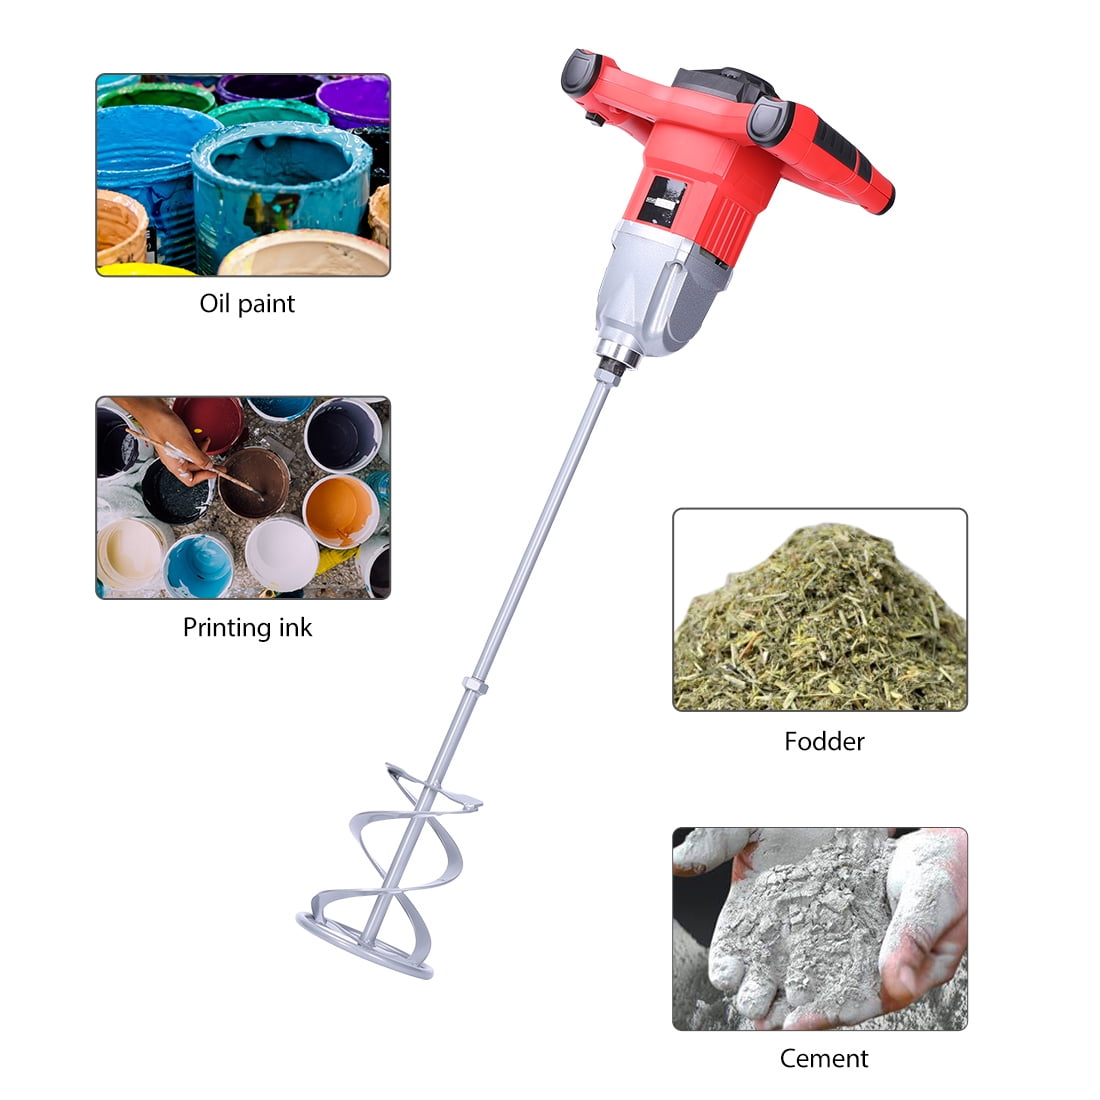 Twin Paddle Electric Mortar Mixer HandHeld Paint Cement Grout Mixer 110V 1600W 